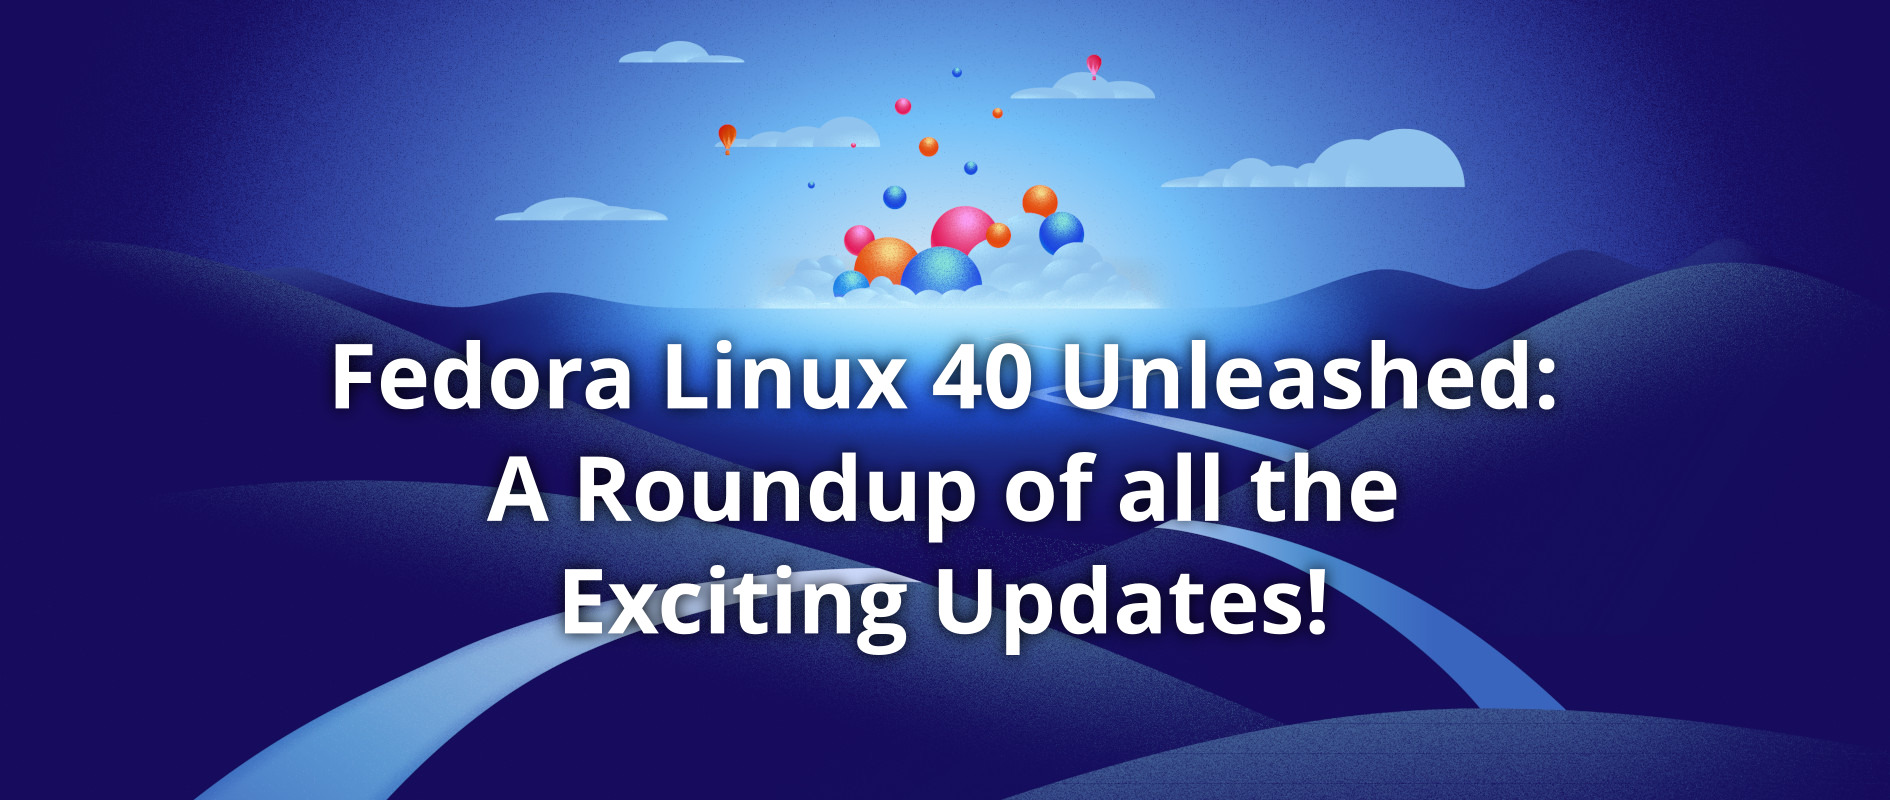 Fedora Linux 40 Unleashed: A Roundup of all the Exciting Updates! - Fedora Magazine